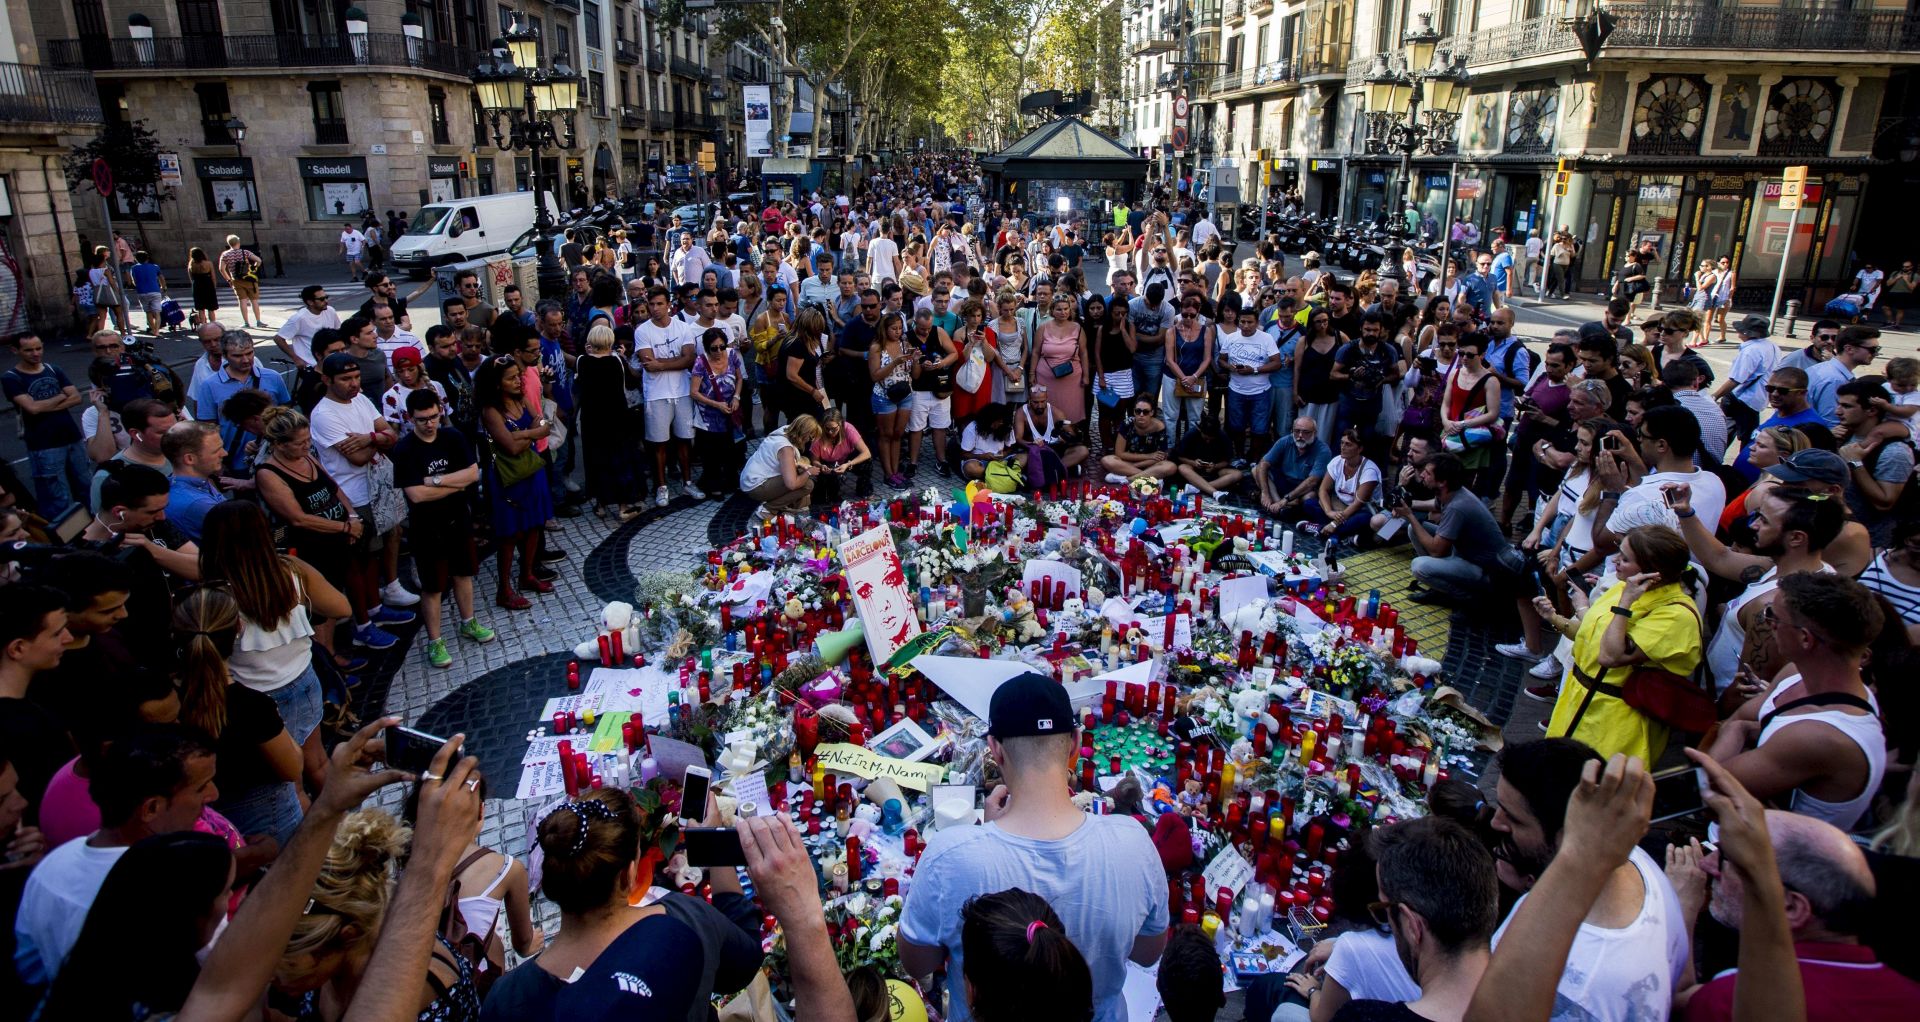 epa06150255 People pay tribute to victims outside the Liceu Theatre, on the site of a deadly van attack in Barcelona, Spain, 18 August 2017. According to media reports, at least 14 people have died and 130 were injured when a van crashed into pedestrians in Las Ramblas, downtown Barcelona in an incident which Spanish police are treating as a terror attack. Similar attack was conducted in coastal city of Cambrils, where five alleged terrorists, who apparently wore bomb belts, were shot dead by security forces on early morning 18 August after they attacked pedestrians using a vehicle next to a promenade, killing one and injuring six people, including a police officer. Police have stated that the attack in Barcelona and the attack in Cambrils are linked. The Islamic State (IS) has claimed the responsibility for the attack in Barcelona.  EPA/QUIQUE GARCIA